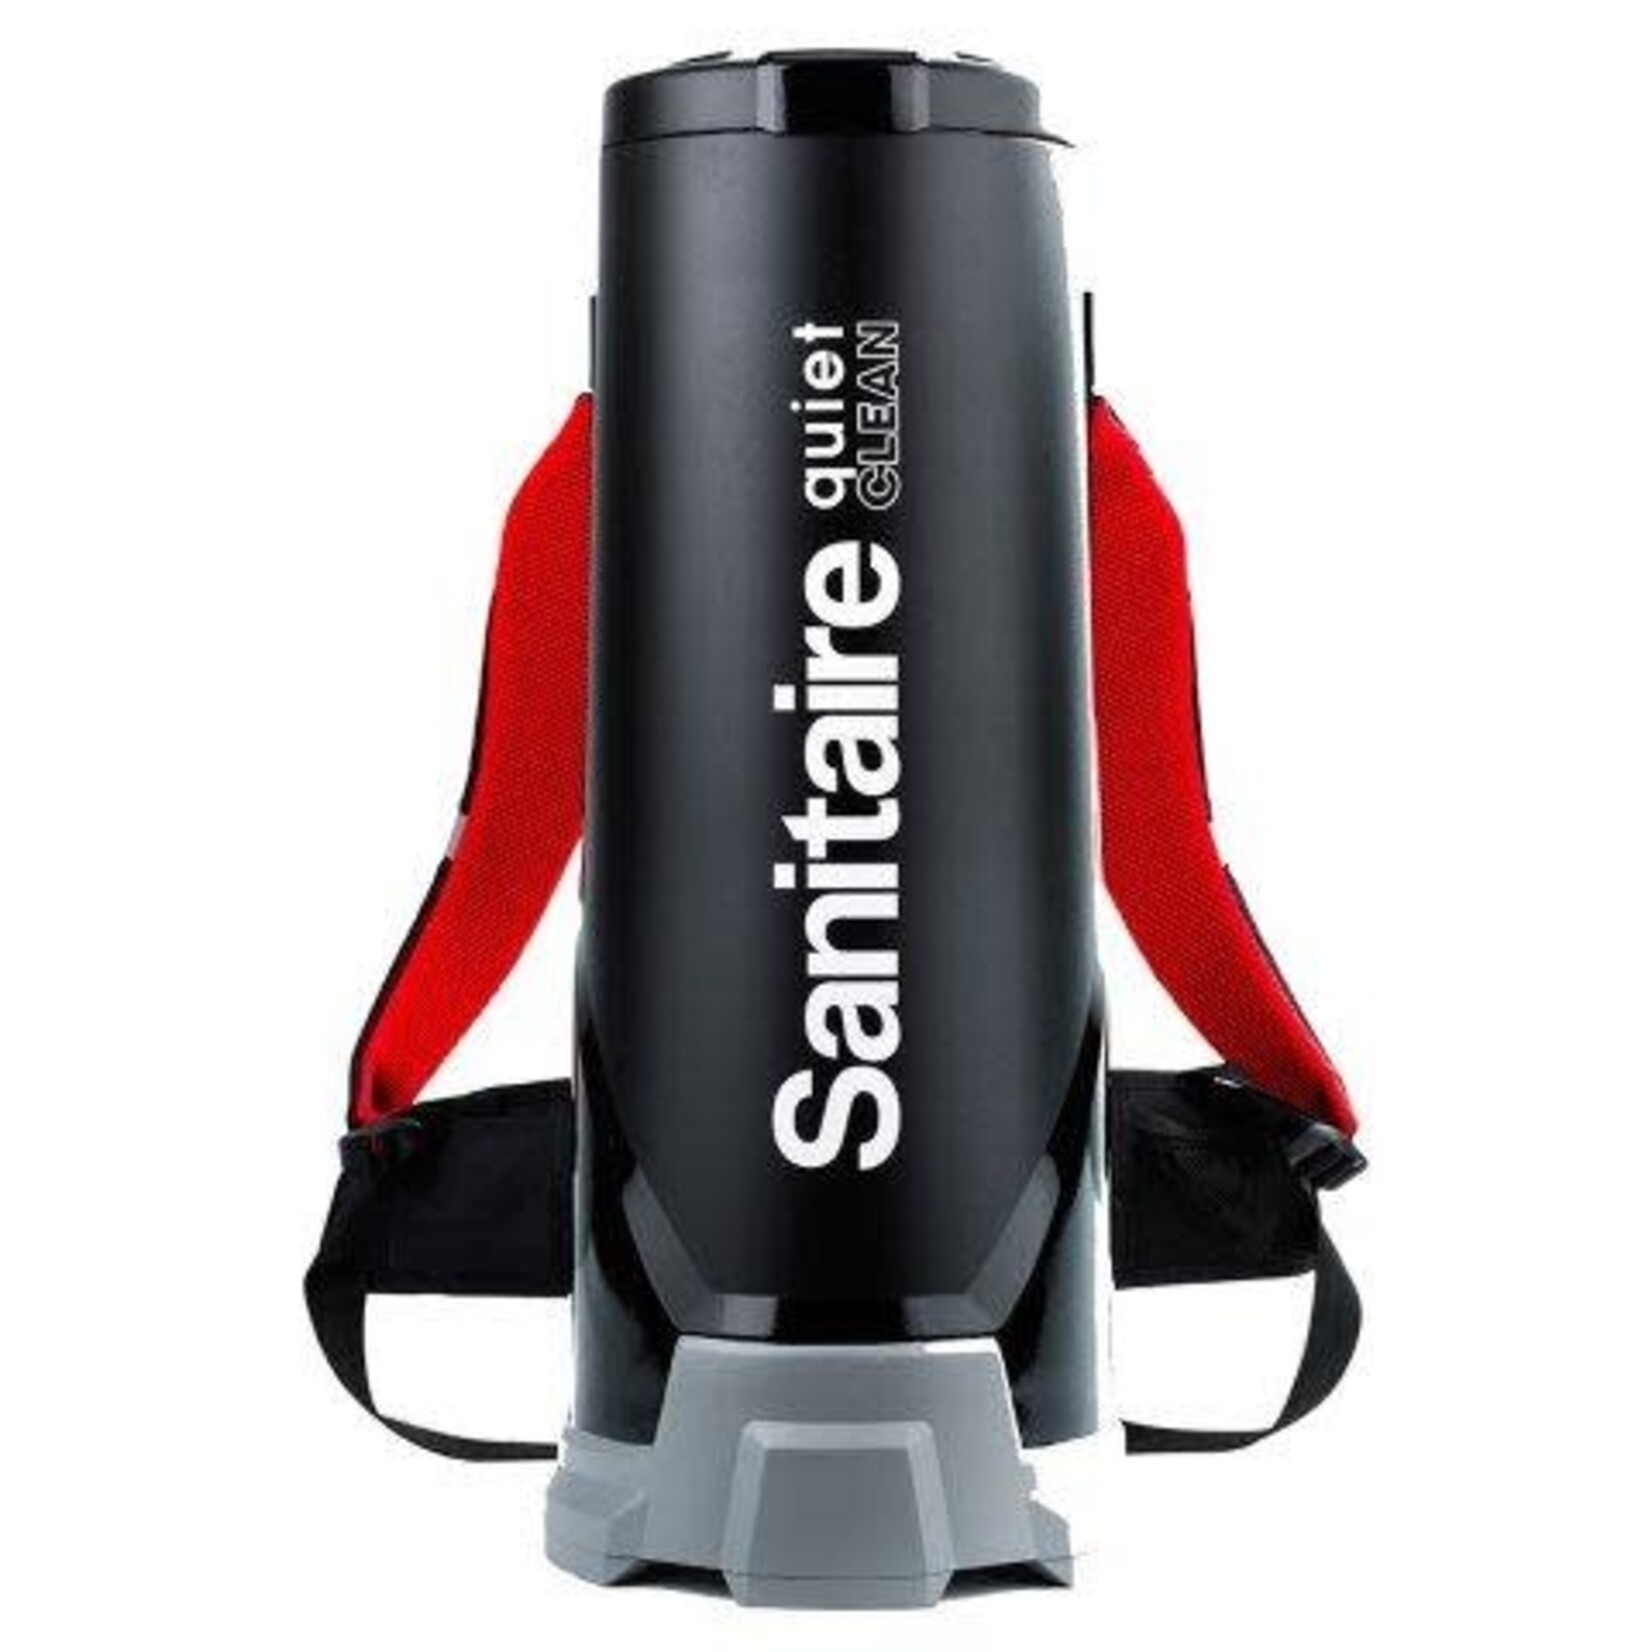 Sanitaire Sanitaire Commercial Backpack - SC 535